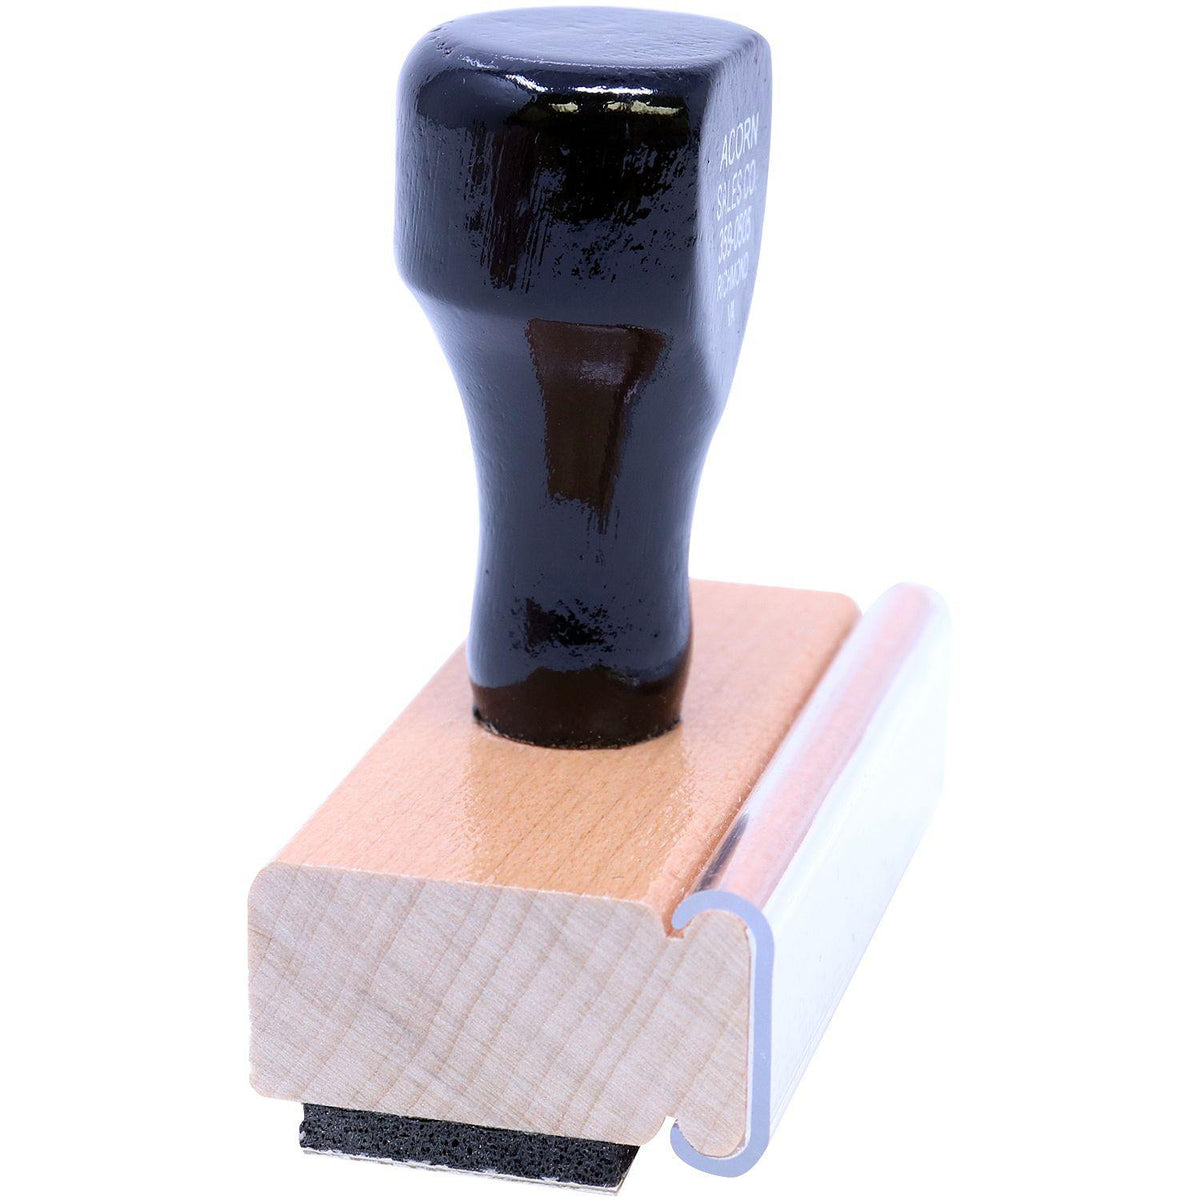 Side View of Asymptomatic Rubber Stamp at an Angle